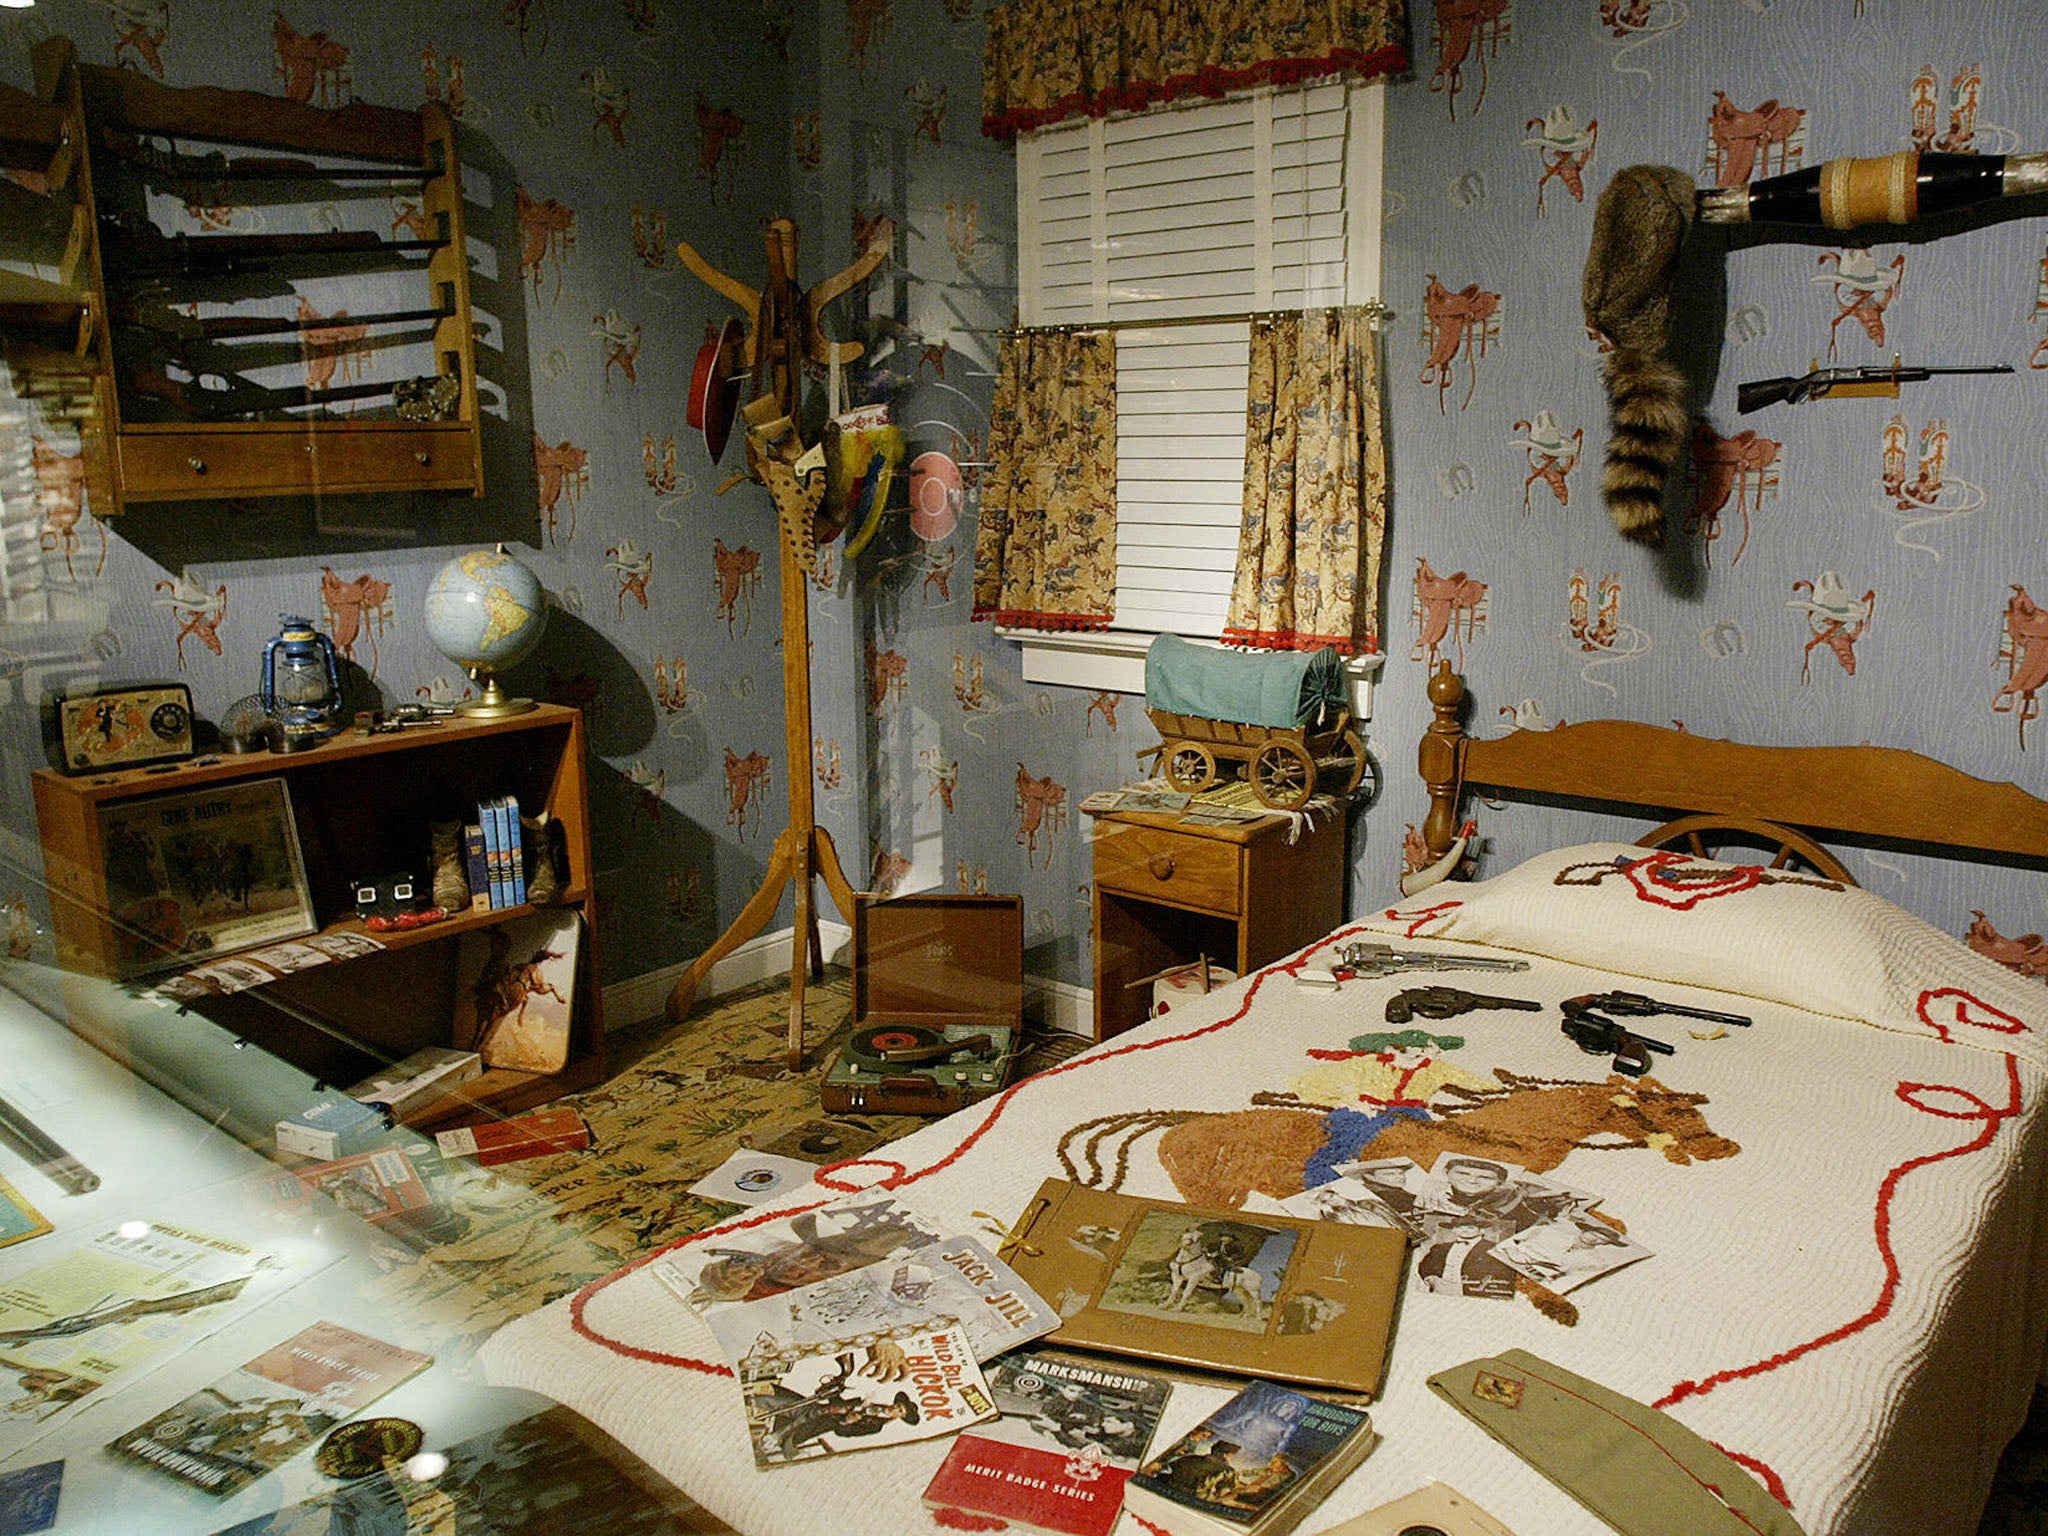 FAIRFAX, UNITED STATES: An exhibit showing a decades old boys room complete with toy guns on the bed and real guns designed for children on the wall